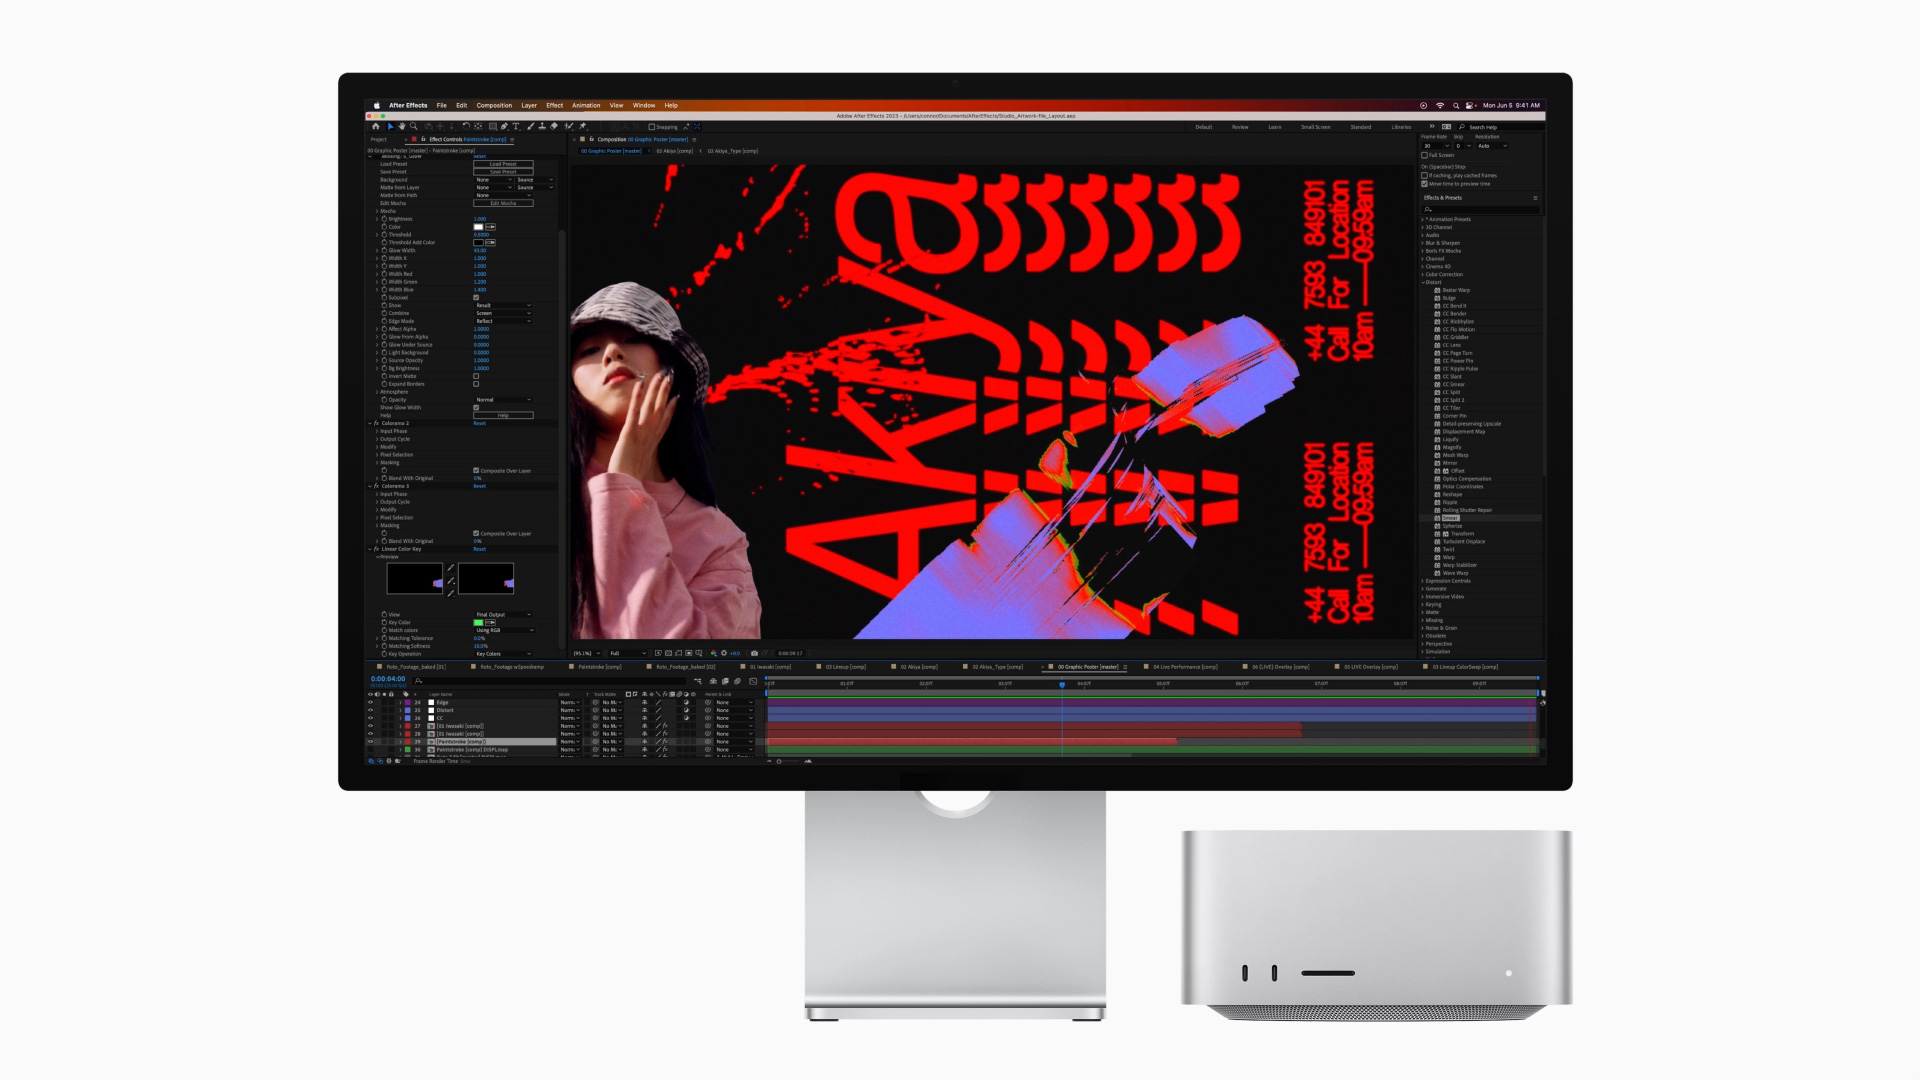 Review: The Mac Studio shows us exactly why Apple left Intel behind